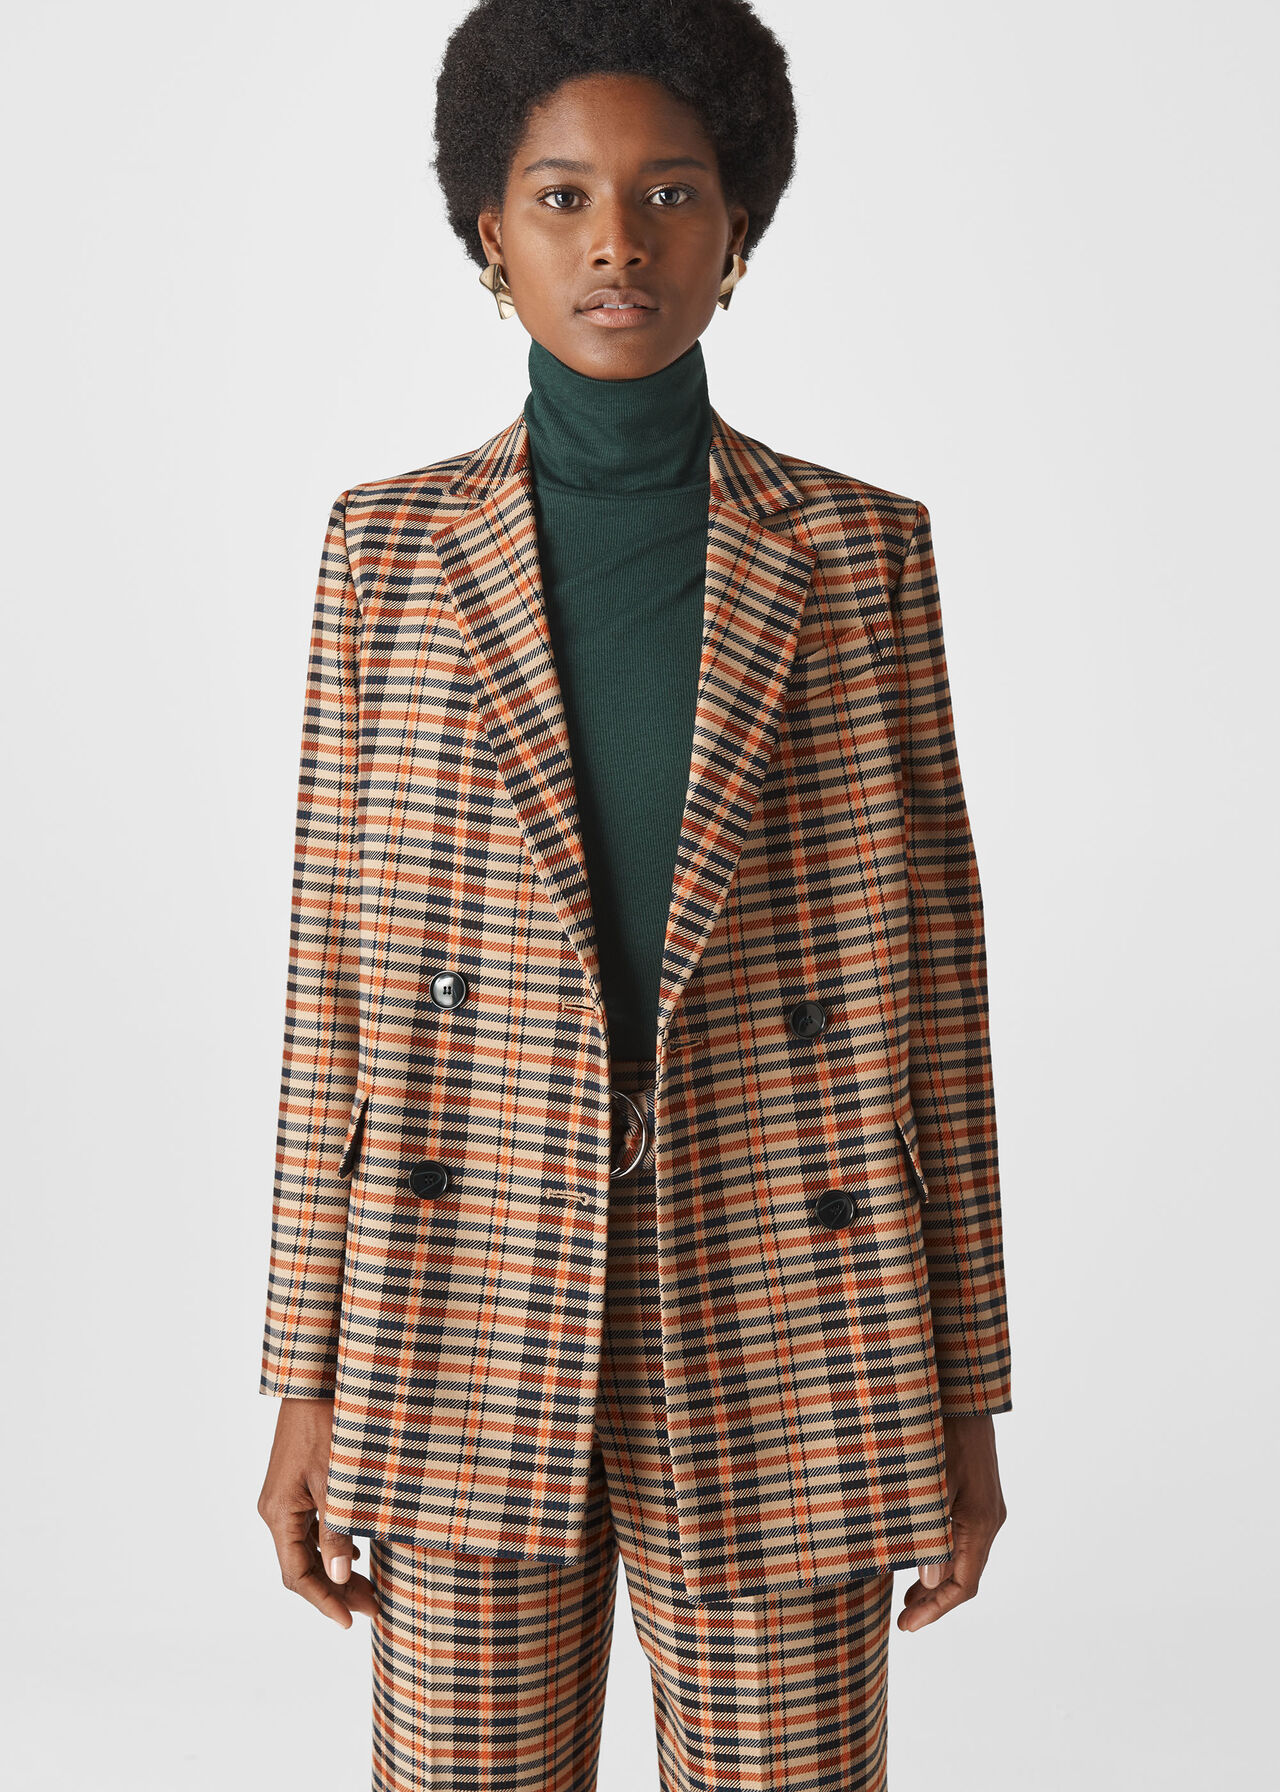 Multicolour Check Double Breasted Blazer | WHISTLES | Whistles UK